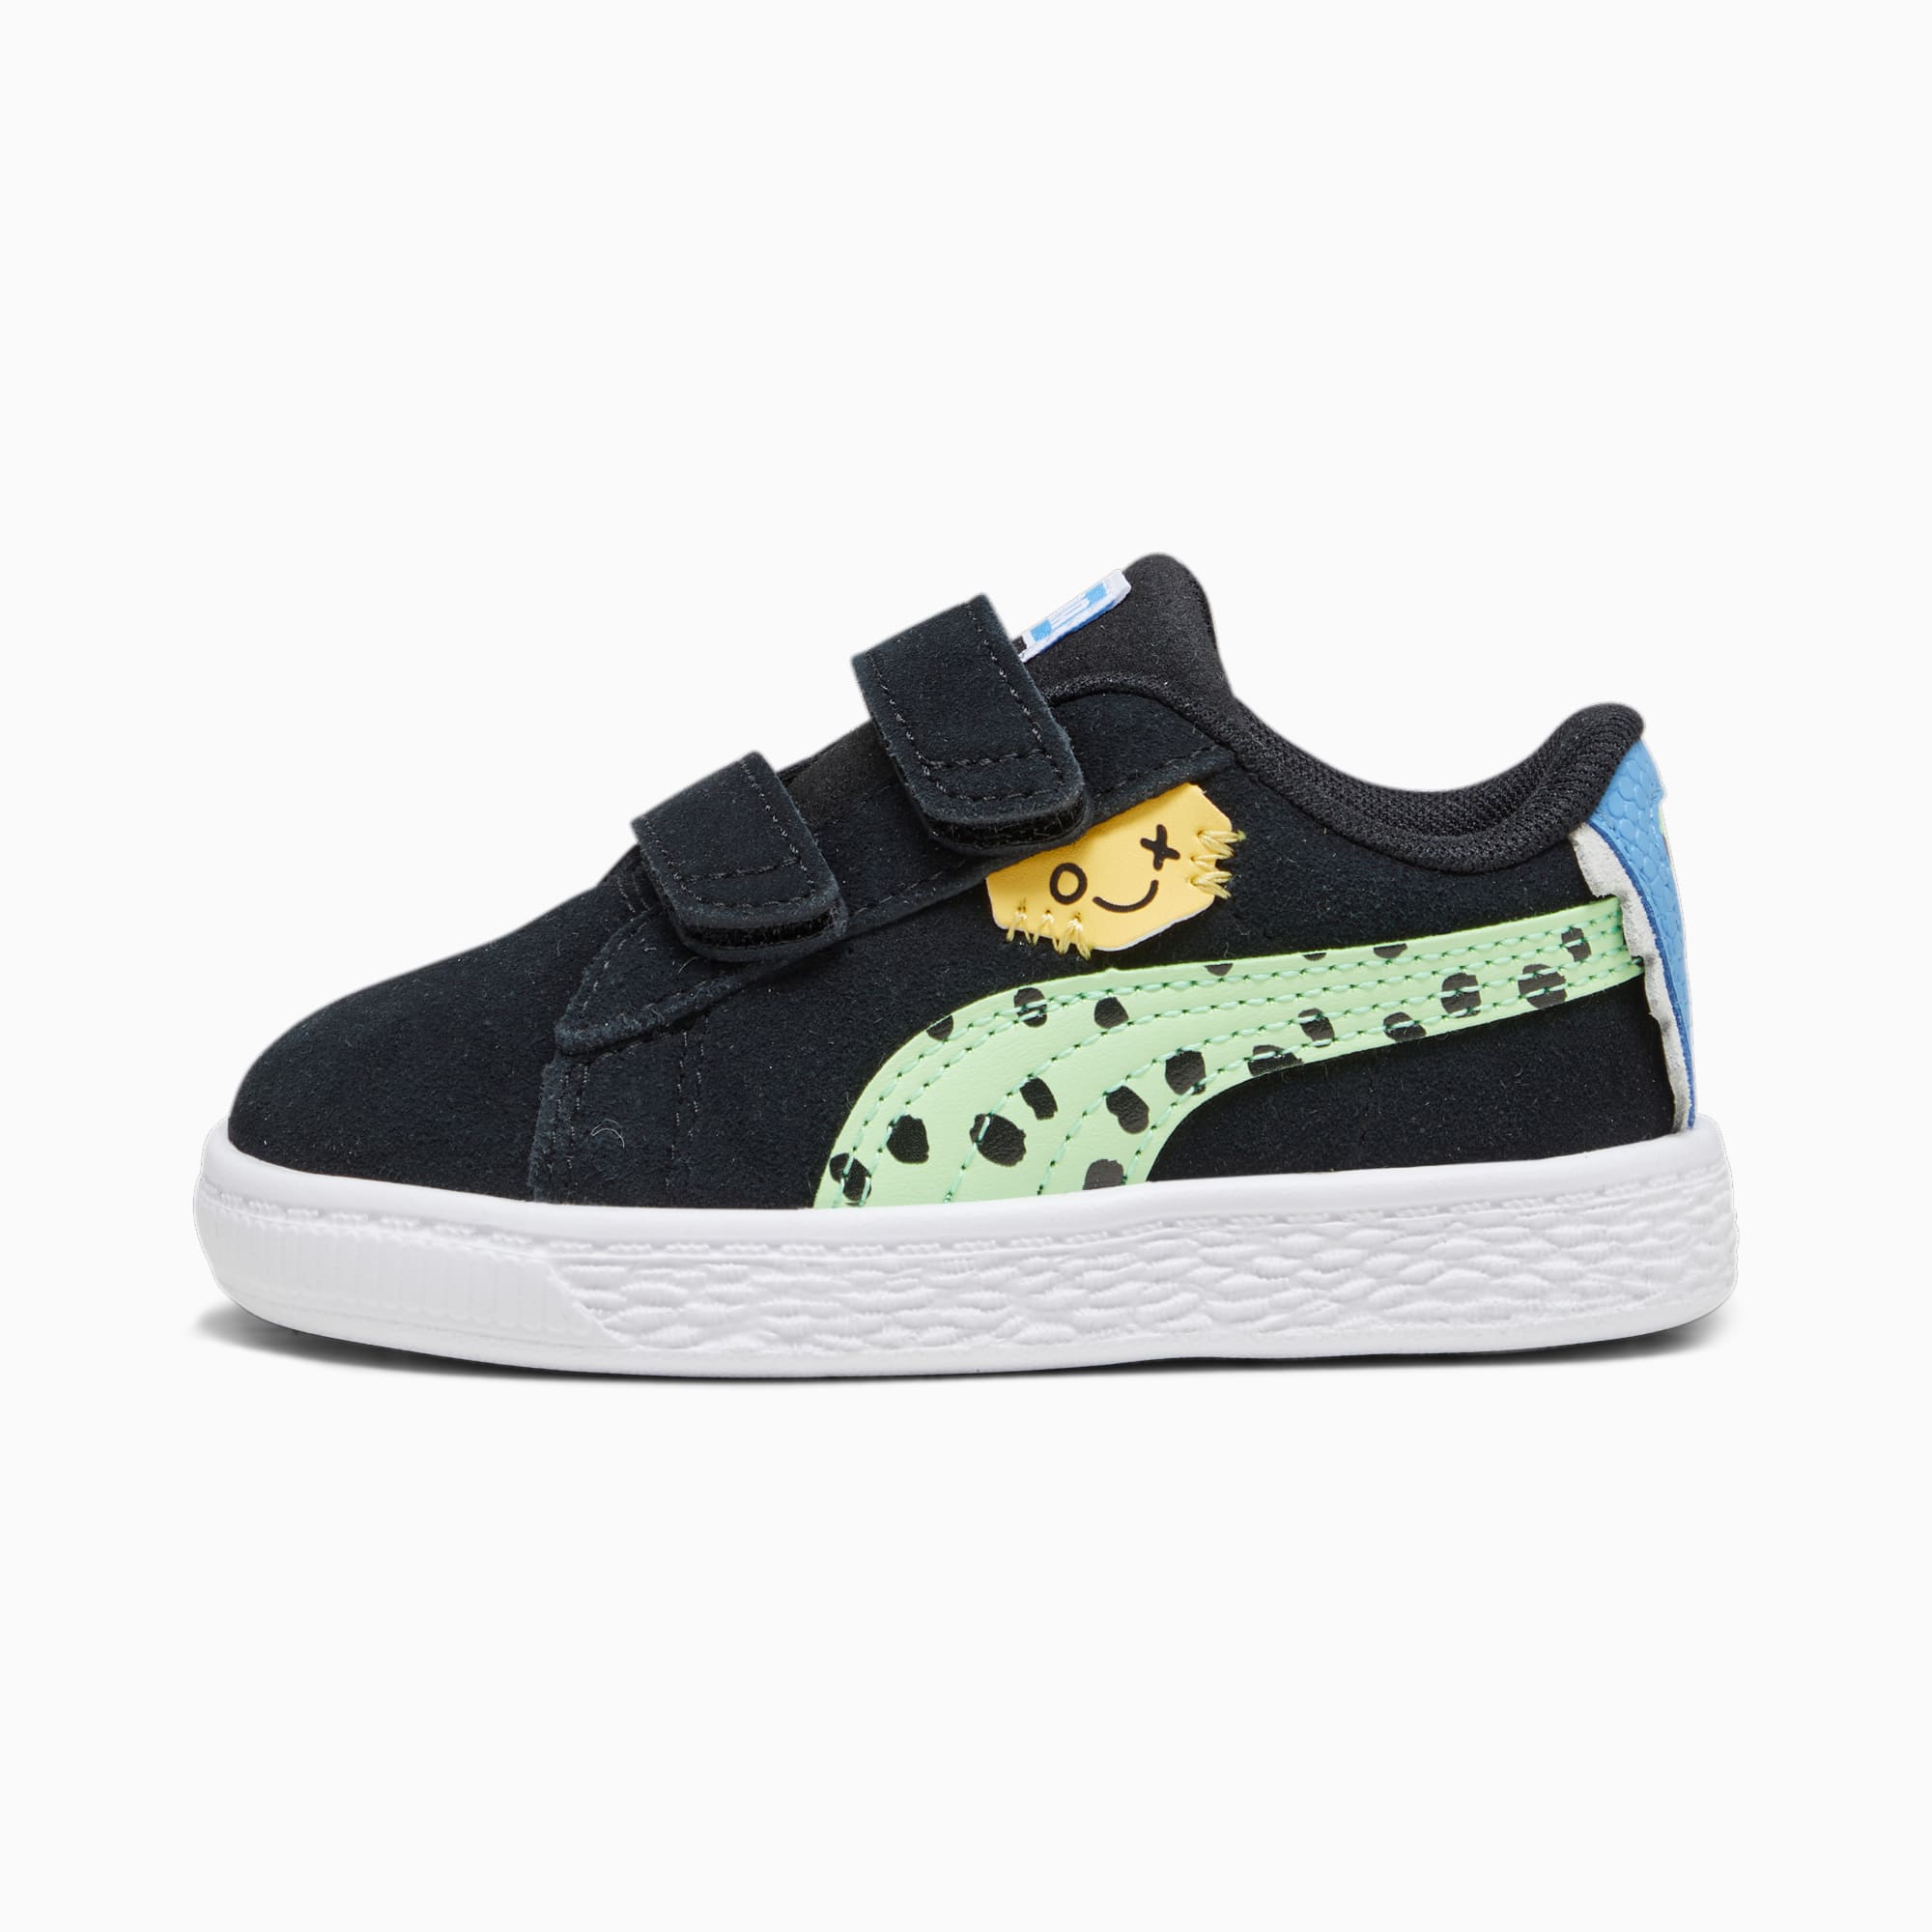 PUMA Suede Classic Mix Match Toddlers' Sneakers, Black/Spring Fern, Size 19, Shoes